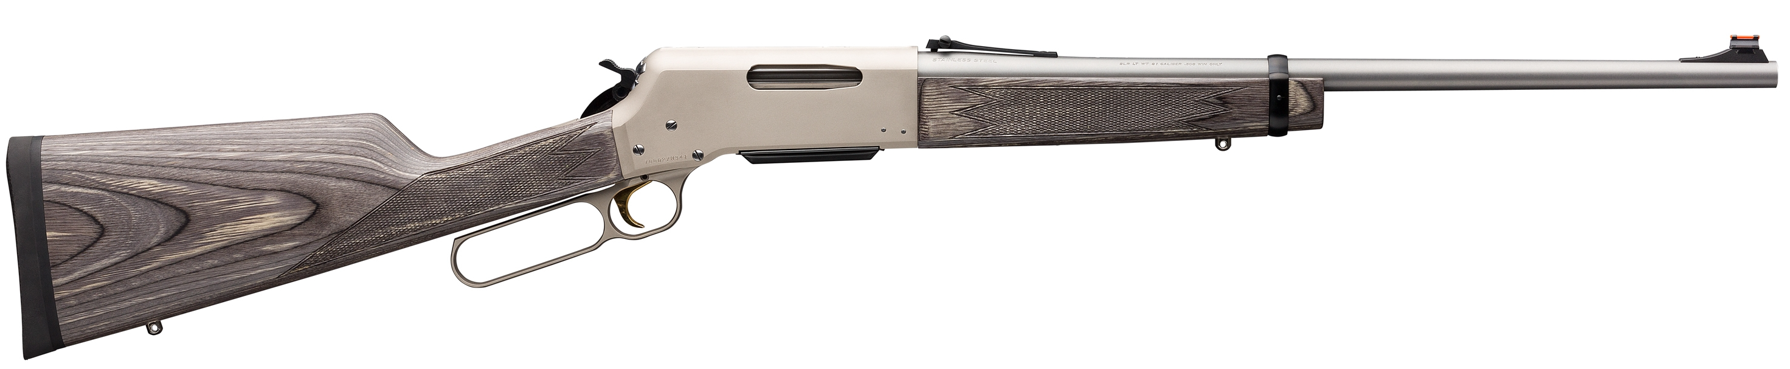 Browning Light Weight Takedown 81